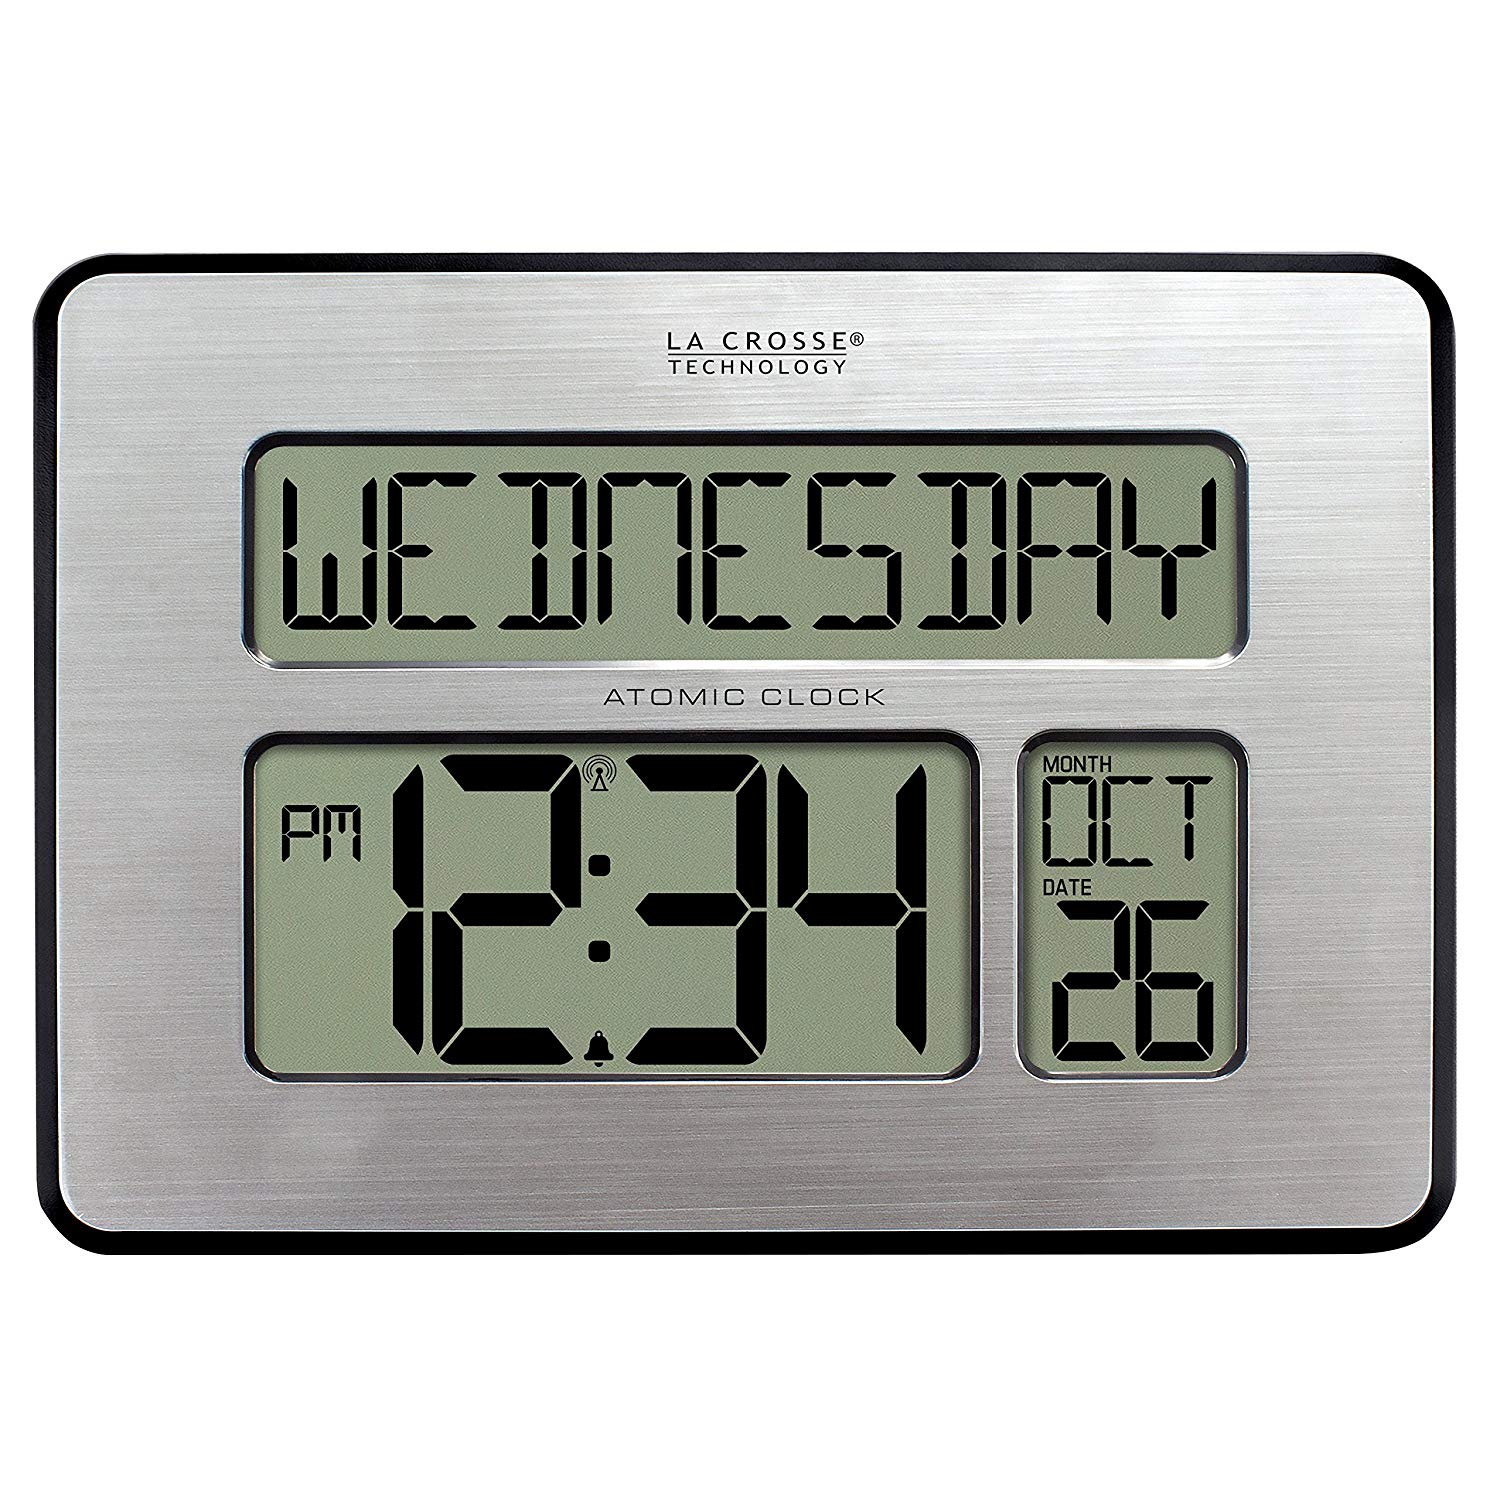 La Crosse Technology 513-1419-INT Atomic Full Calendar Clock with Extra Large Digits for The Elderly